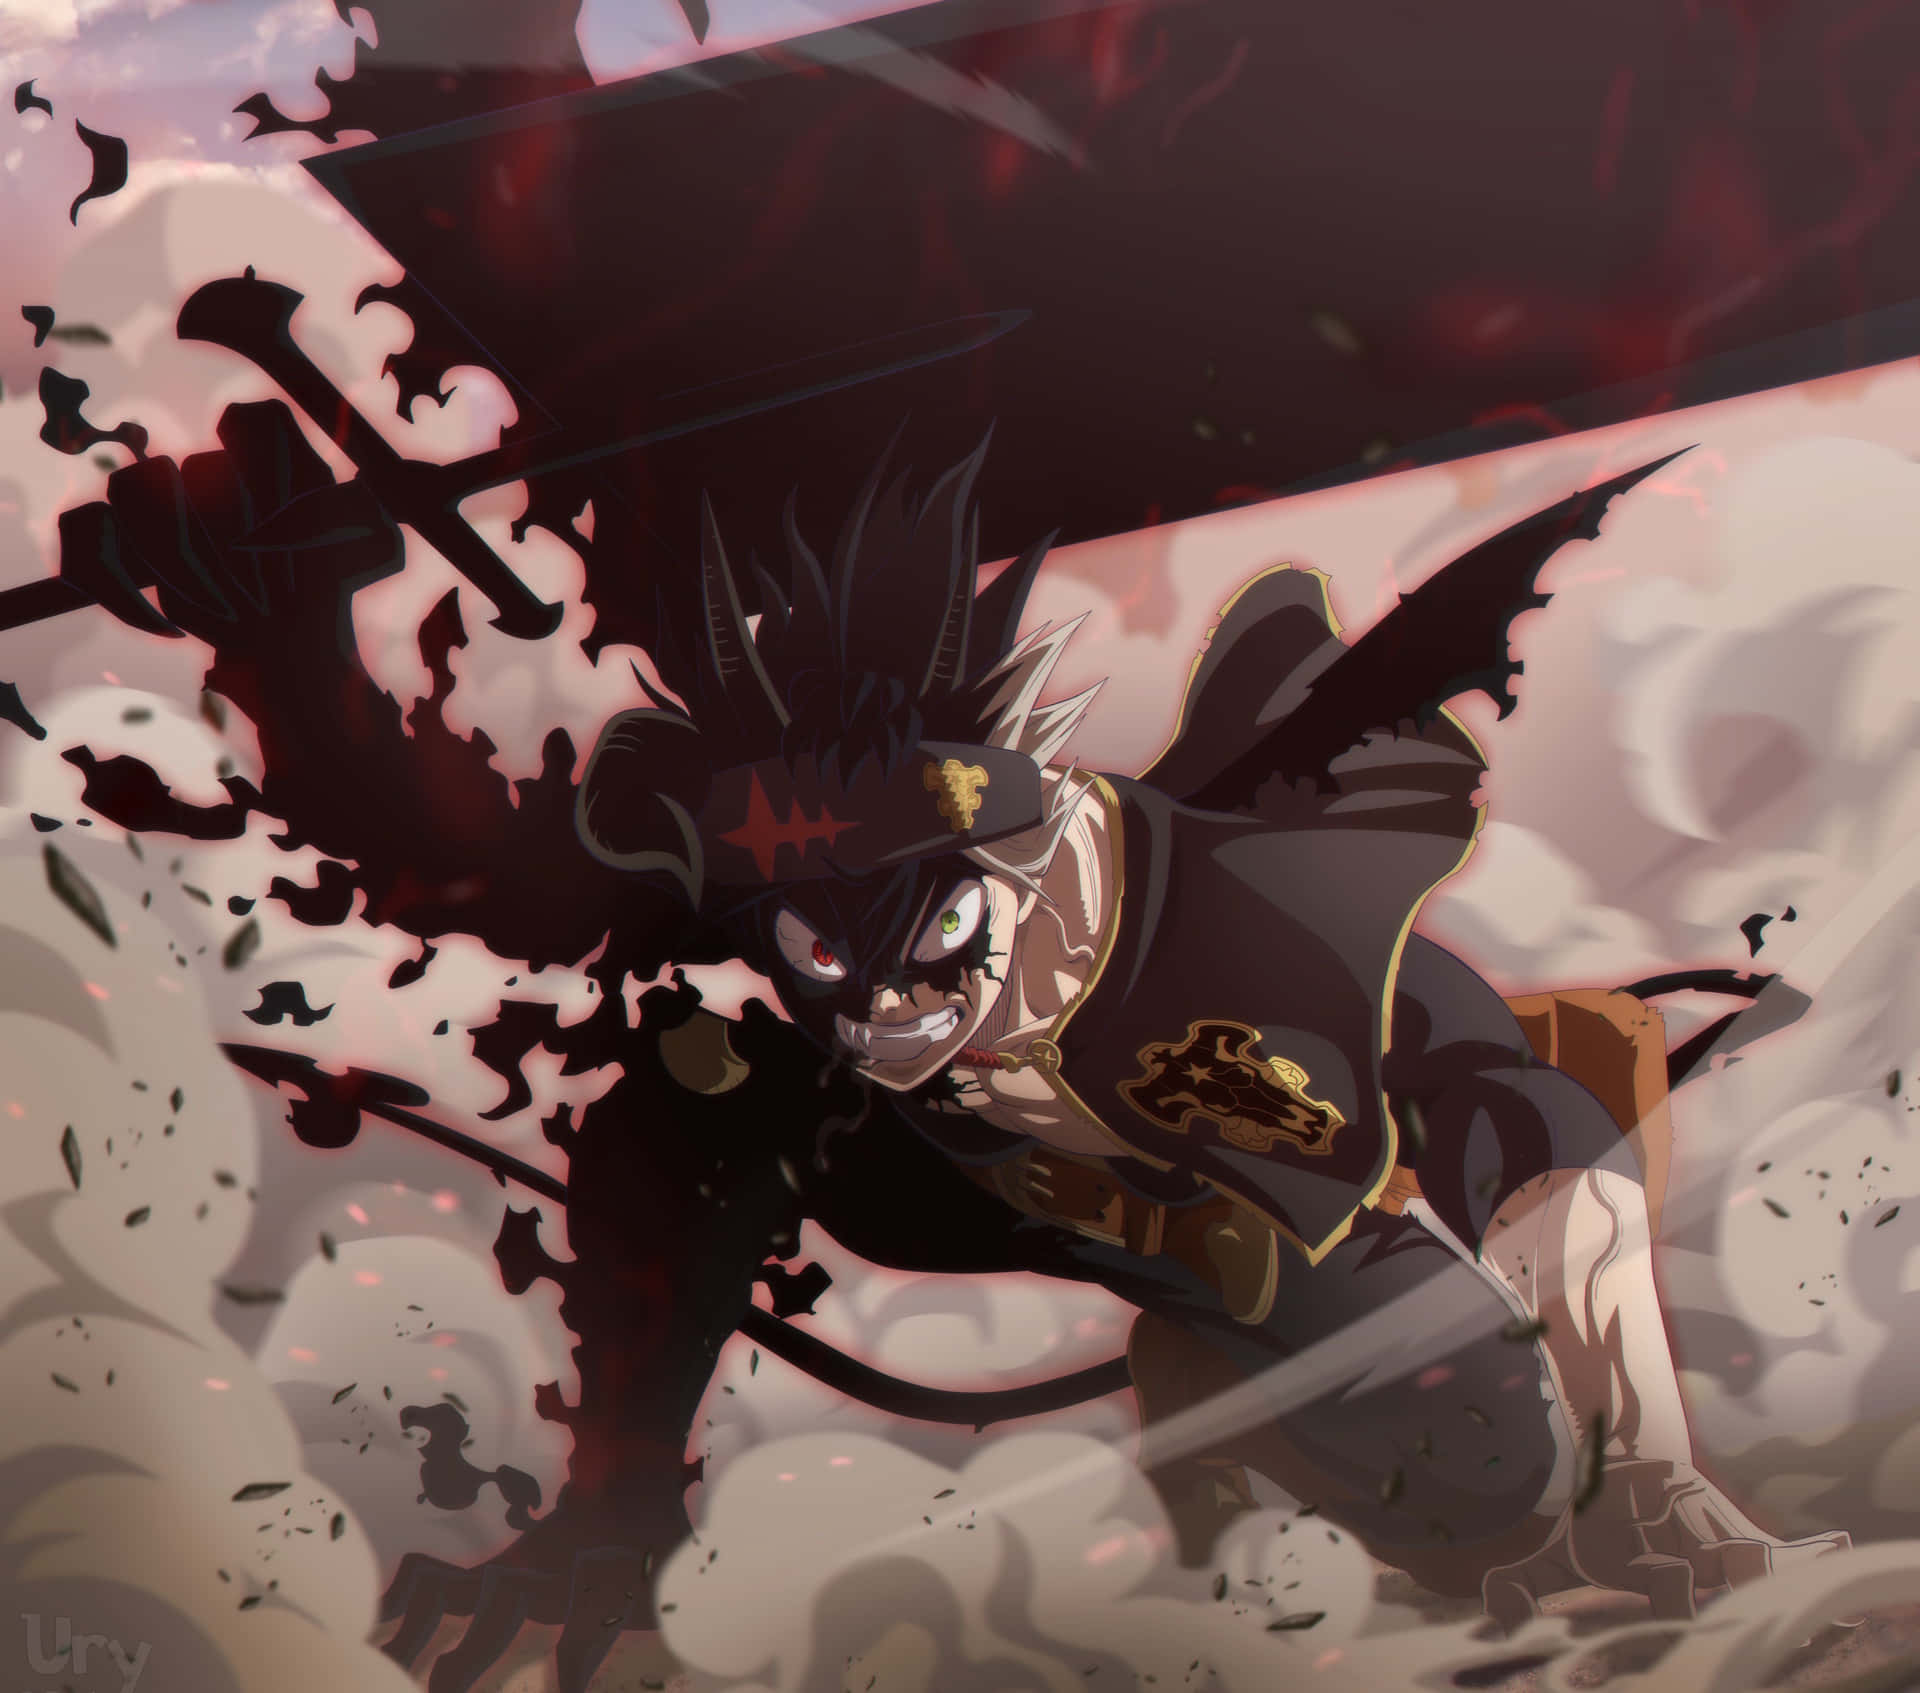 "black Clover's Licht - Epitome Of Magic Power And Leader Of The Elves" Wallpaper